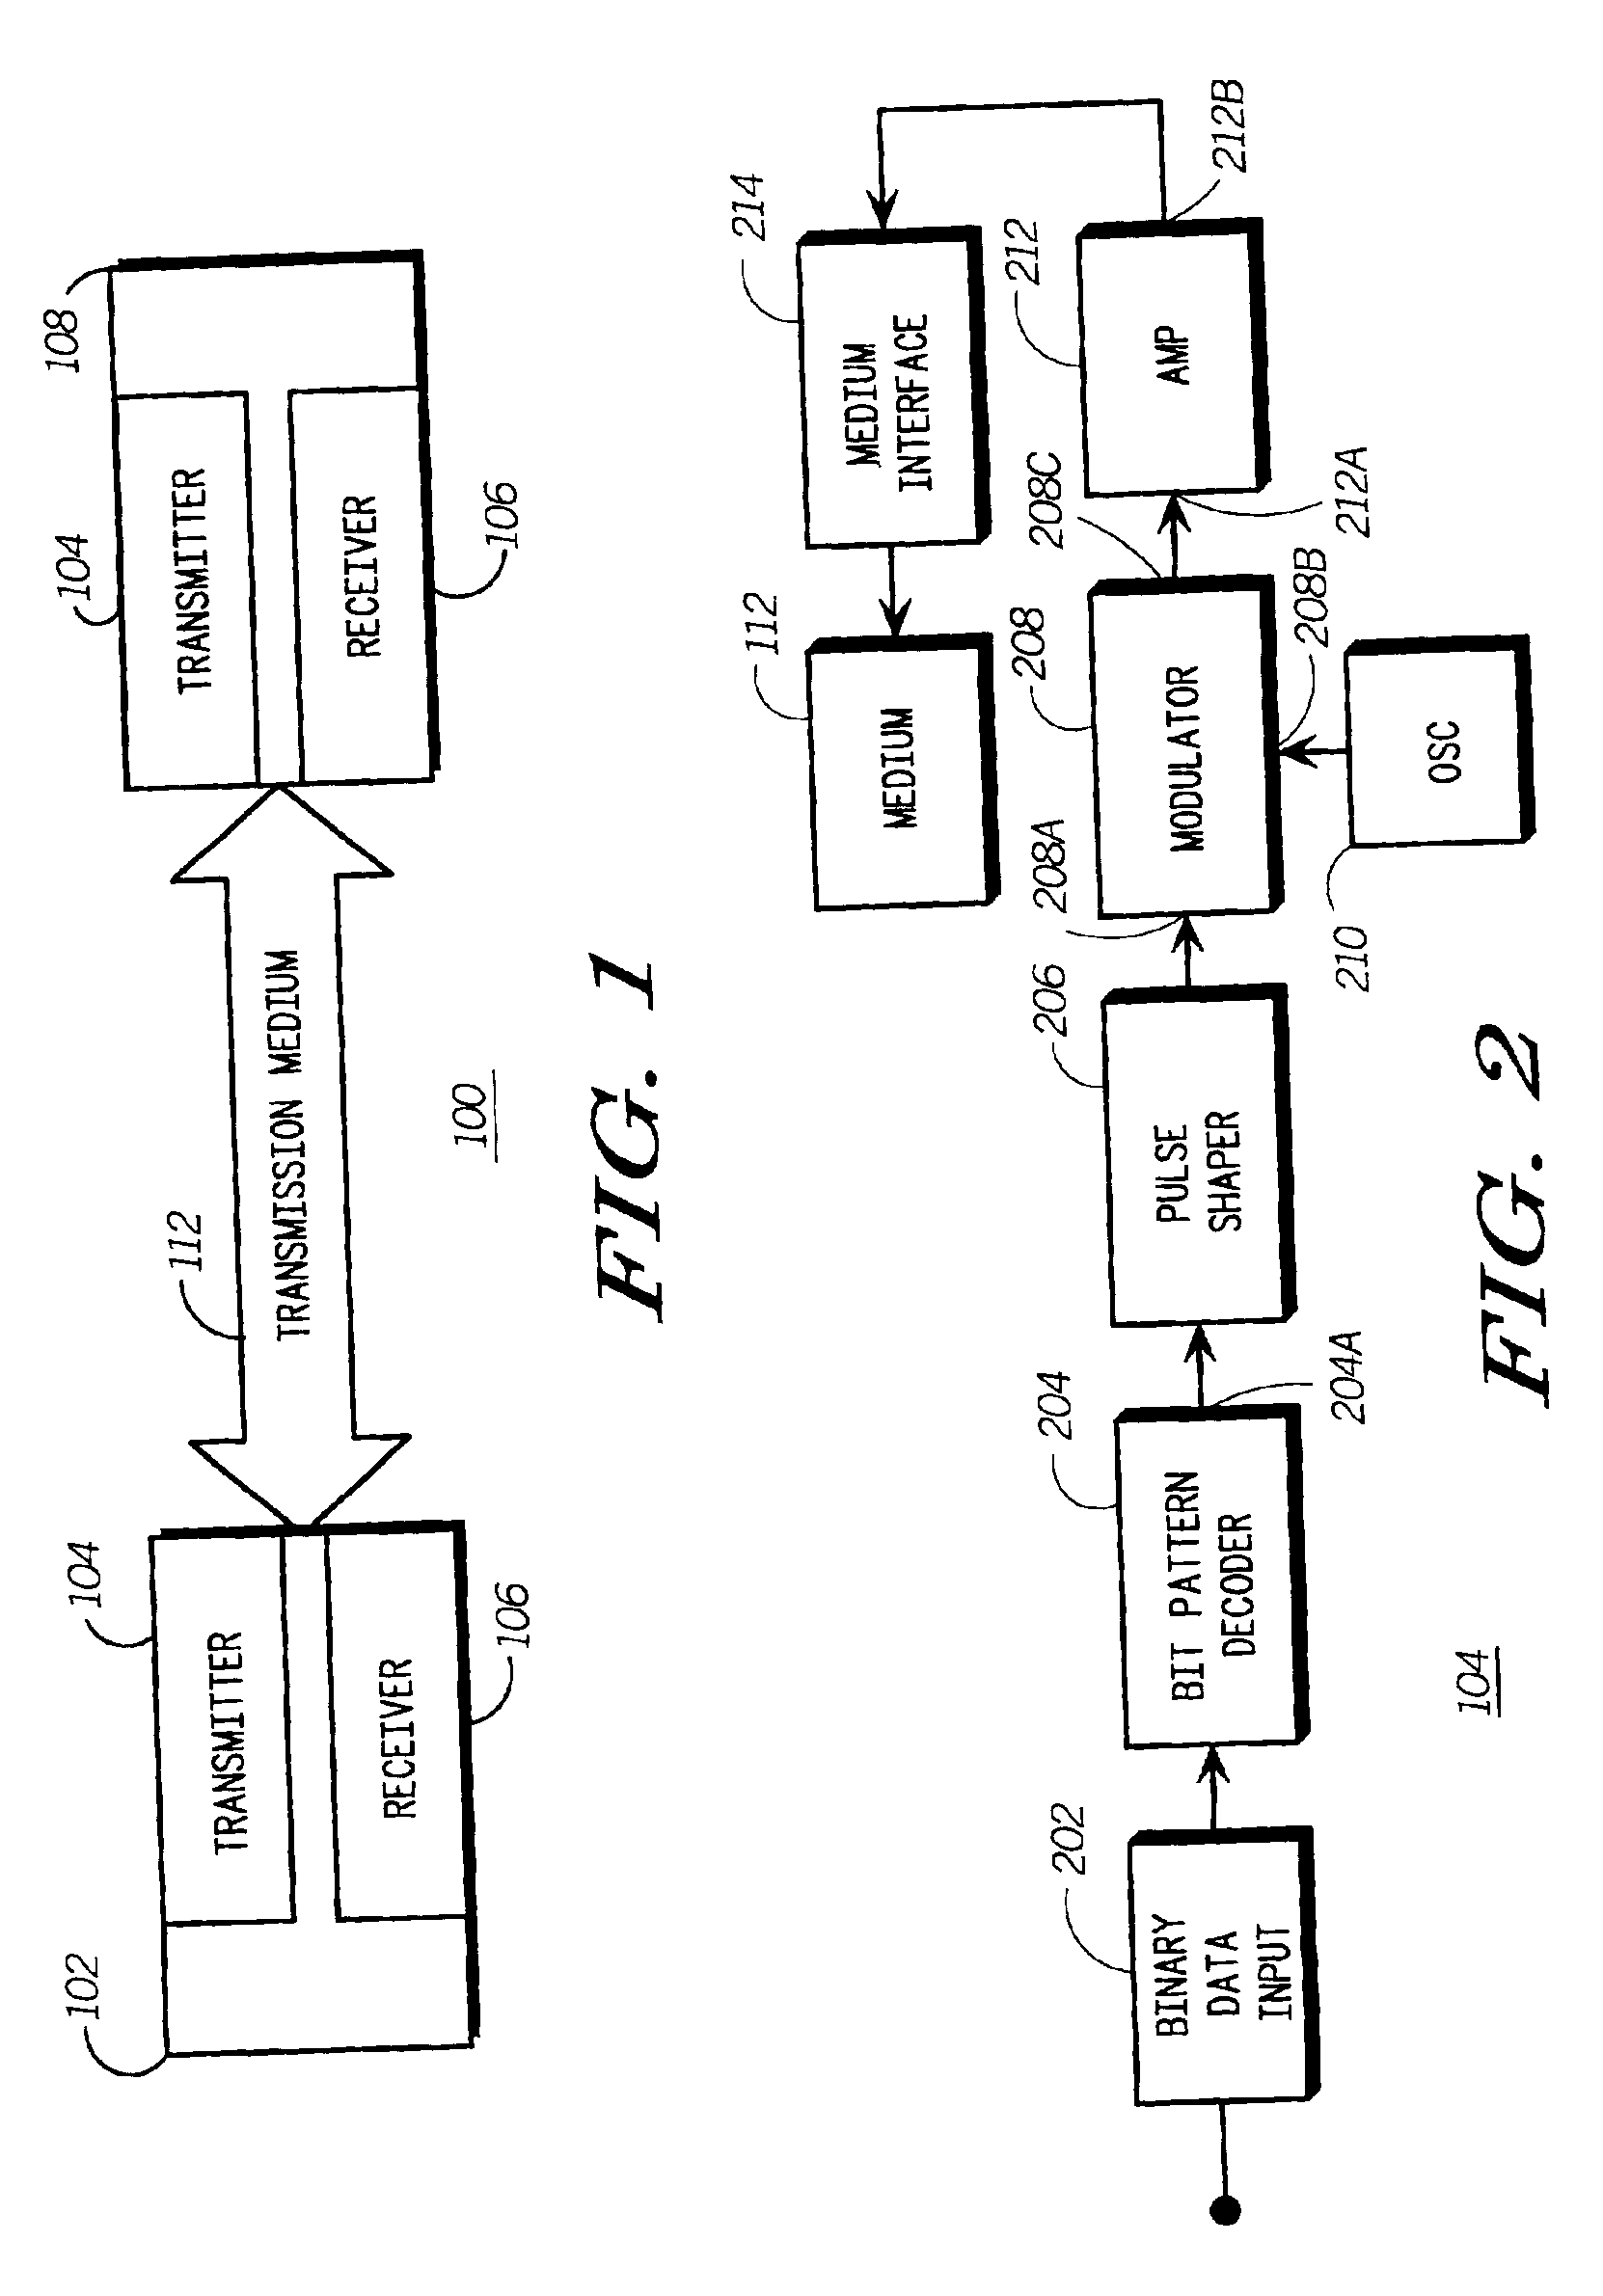 System for code division multi-access communication